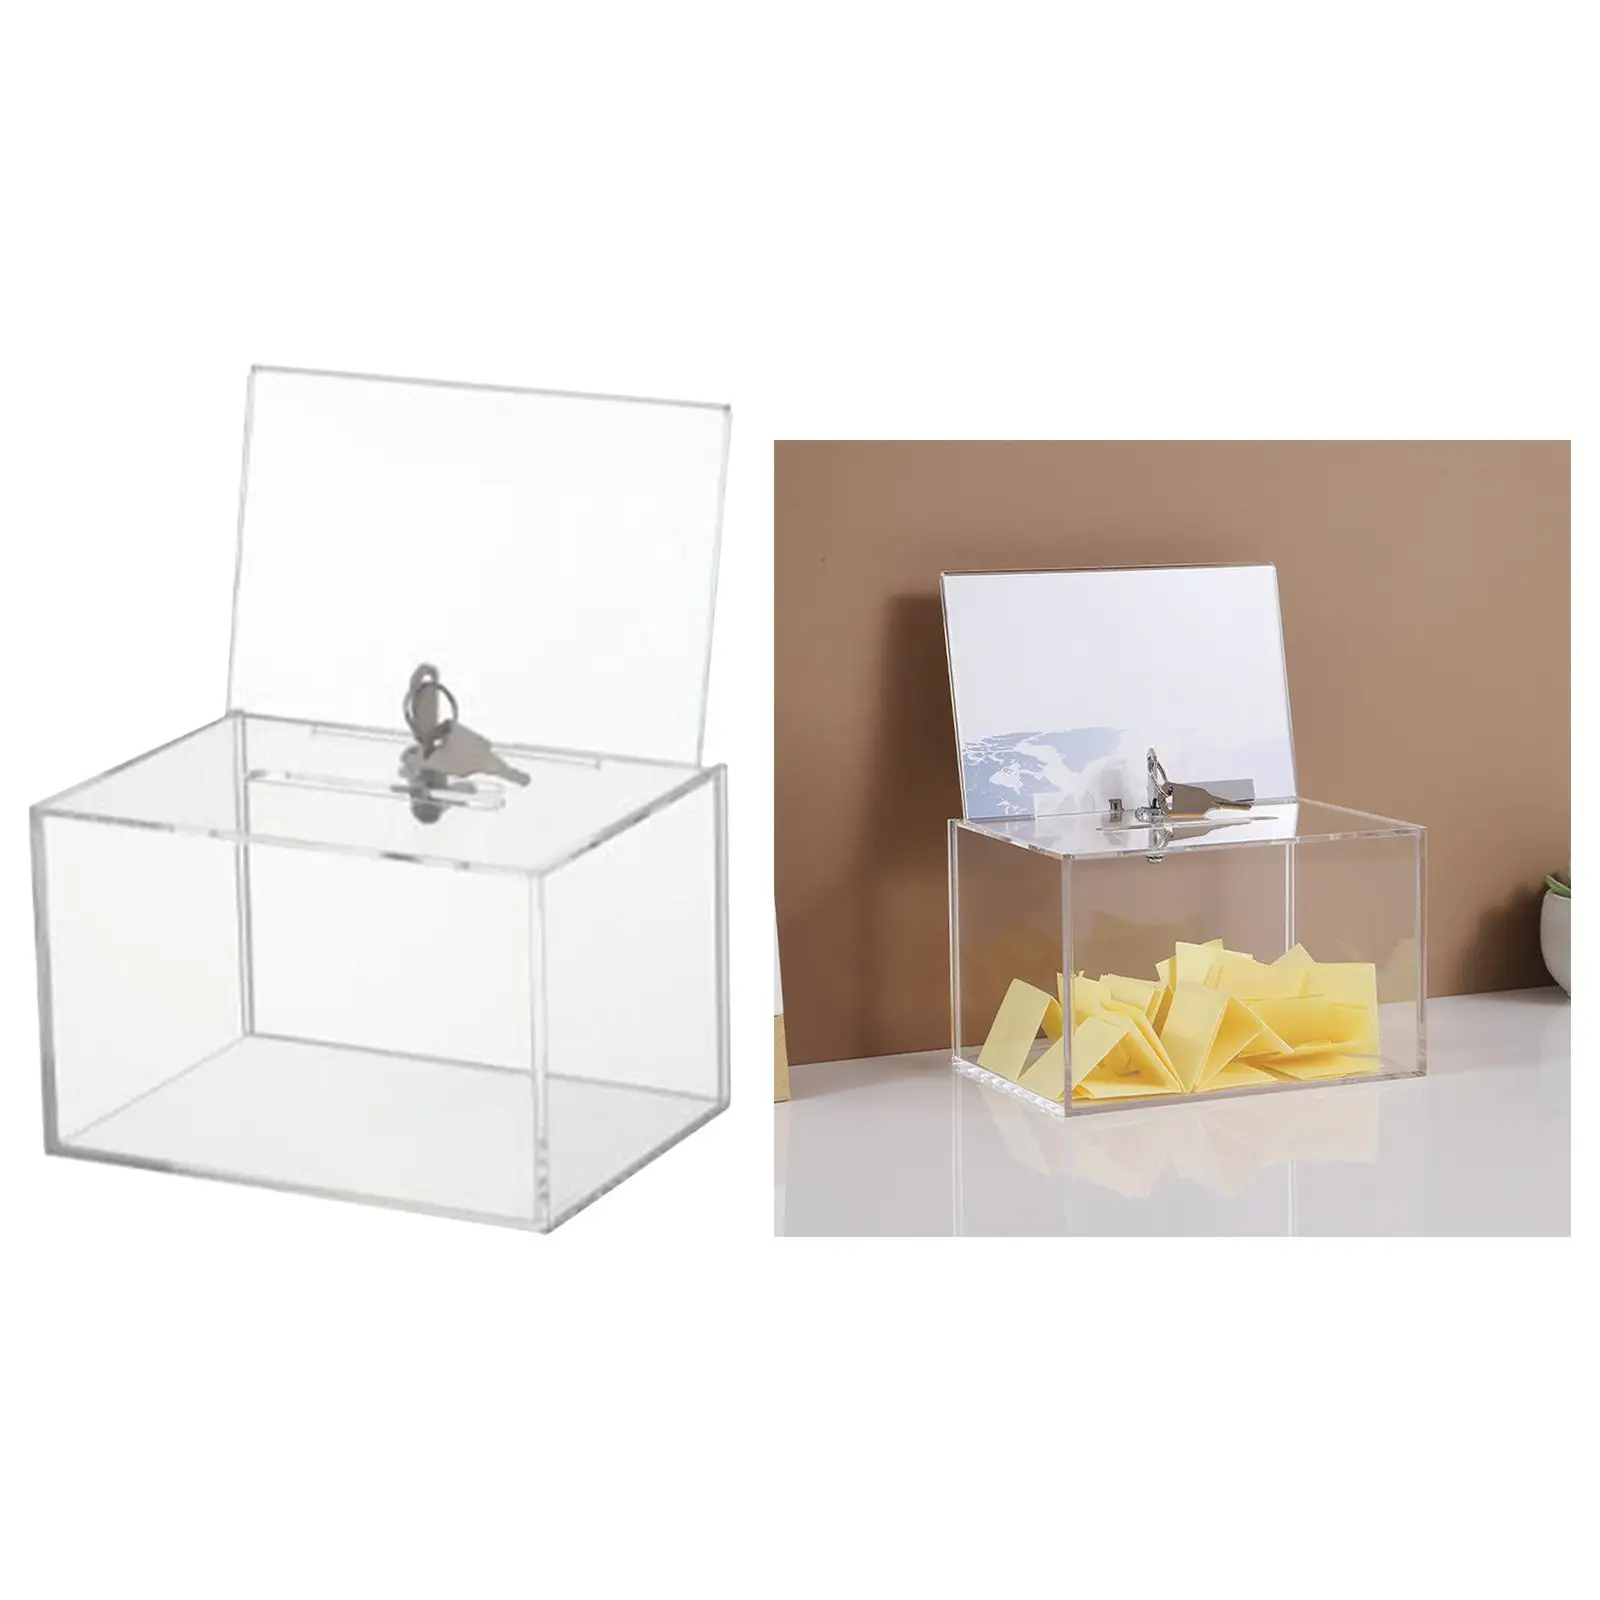 Acrylic Donation Box Post Mail Box Mailbox Letter Post Charity Ticket Container Clear Voting Box for Reception Community Events